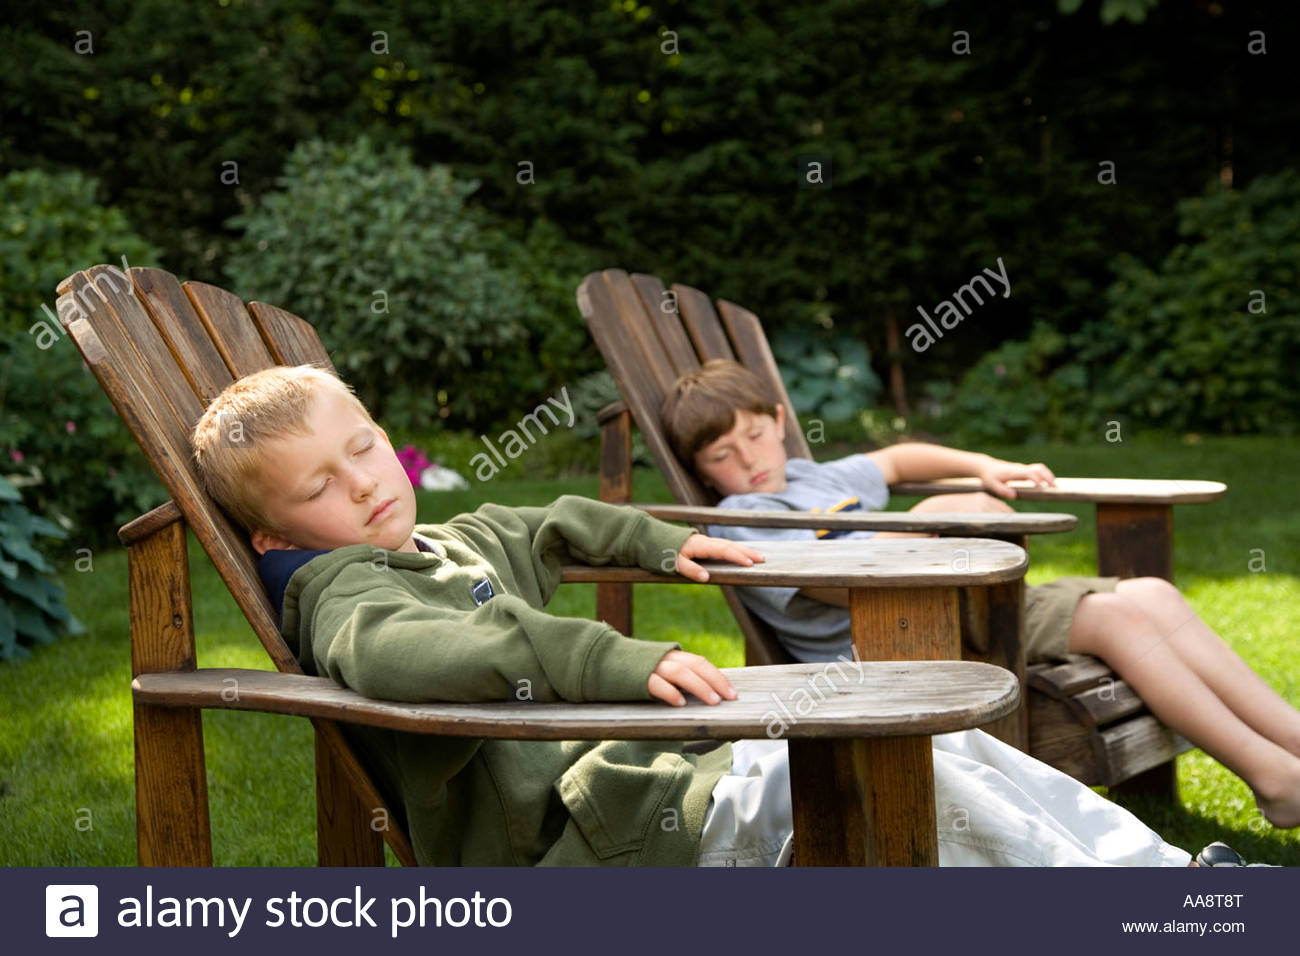 Young Boys Relaxing In Backyard Lawn Chairs Stock Photo Royalty